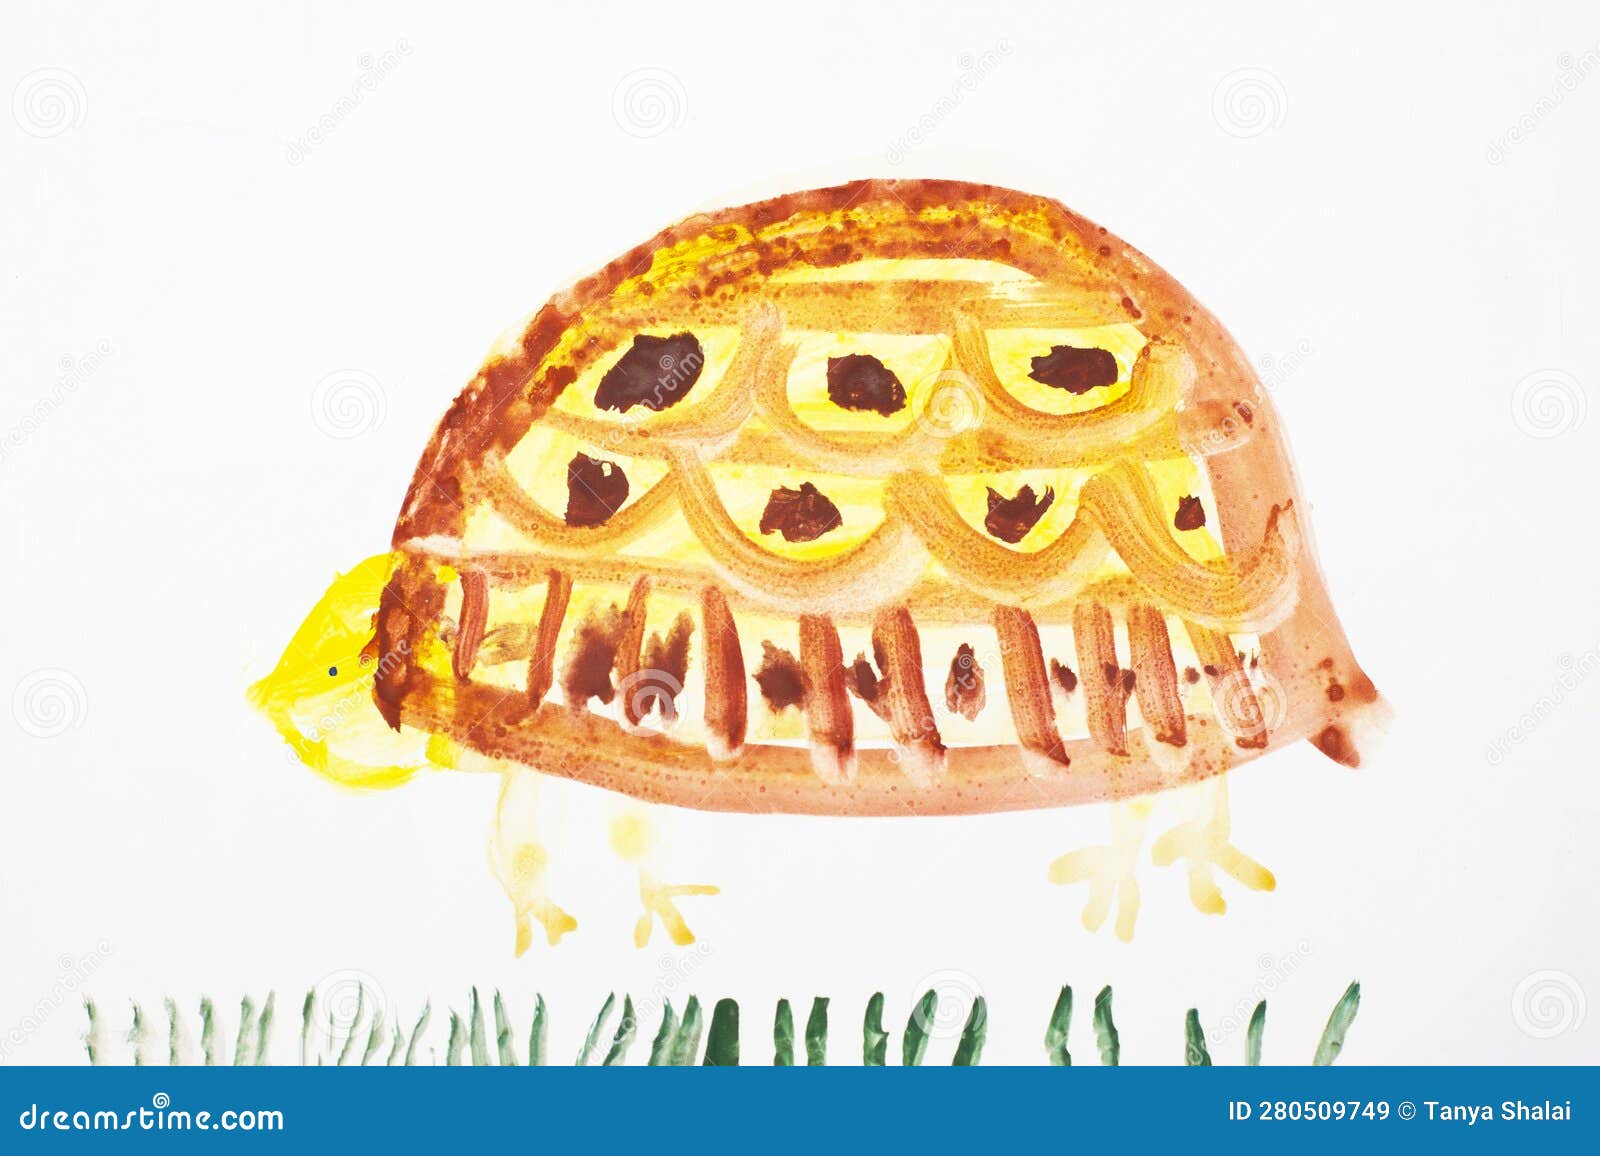 big yellow turtle. real drawing of a small child. drawing by watercolor.